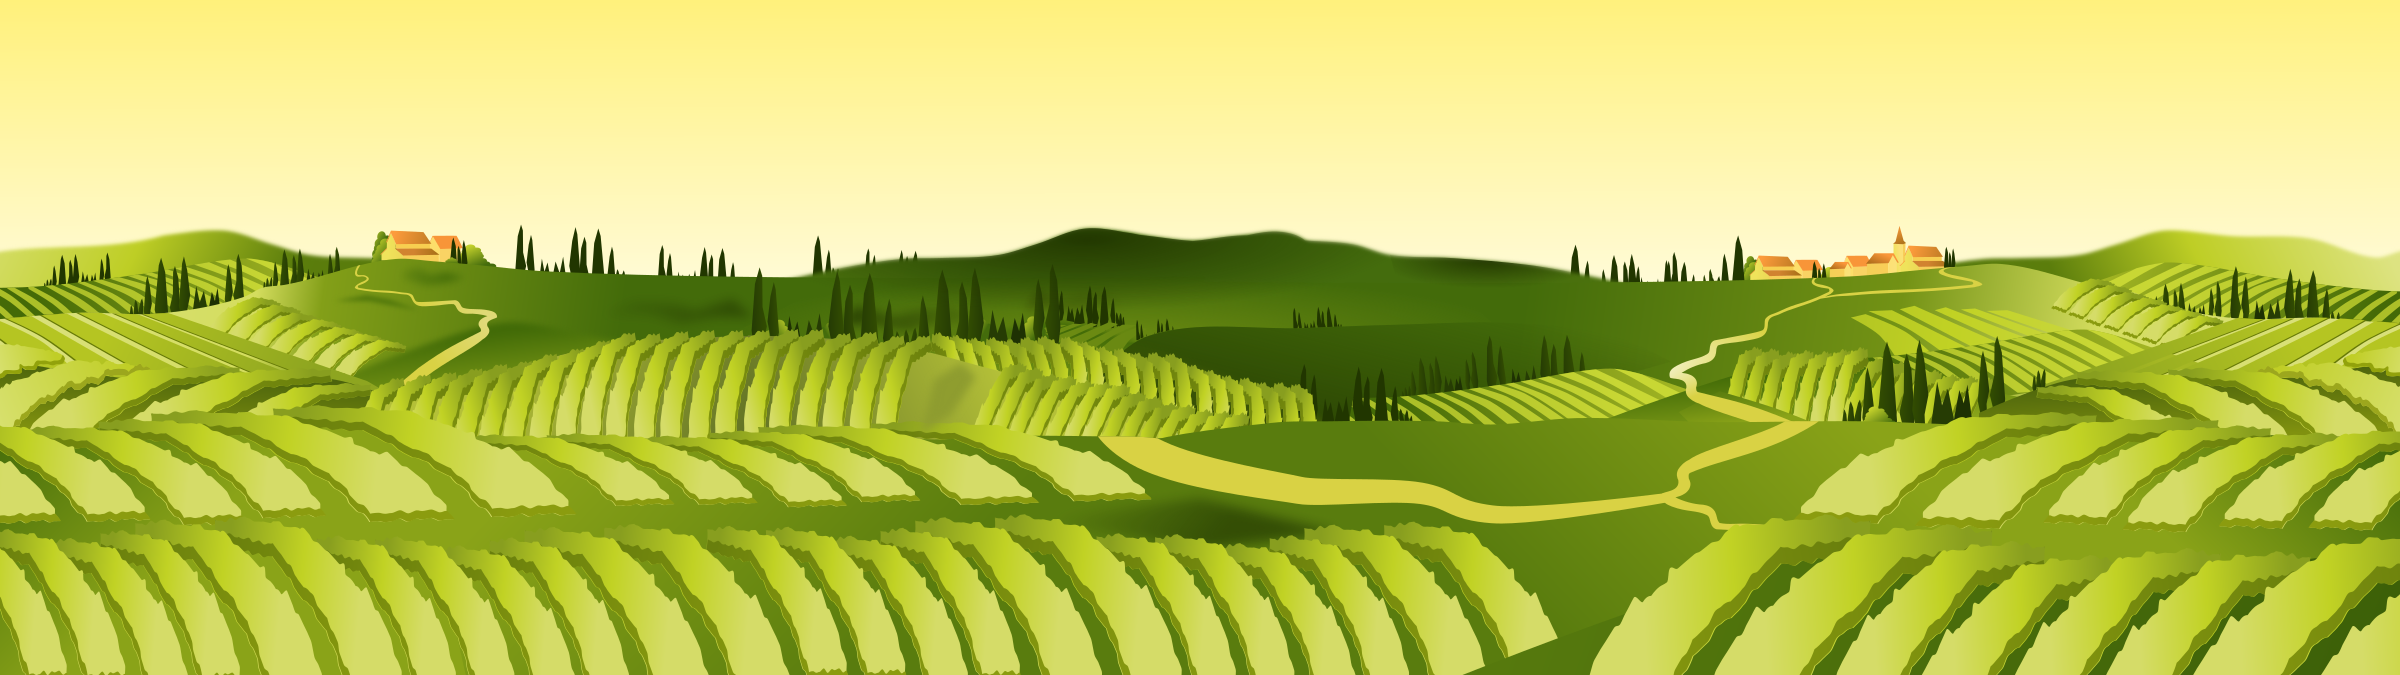 Agriculture clipart agriculture field. Home articles and databases